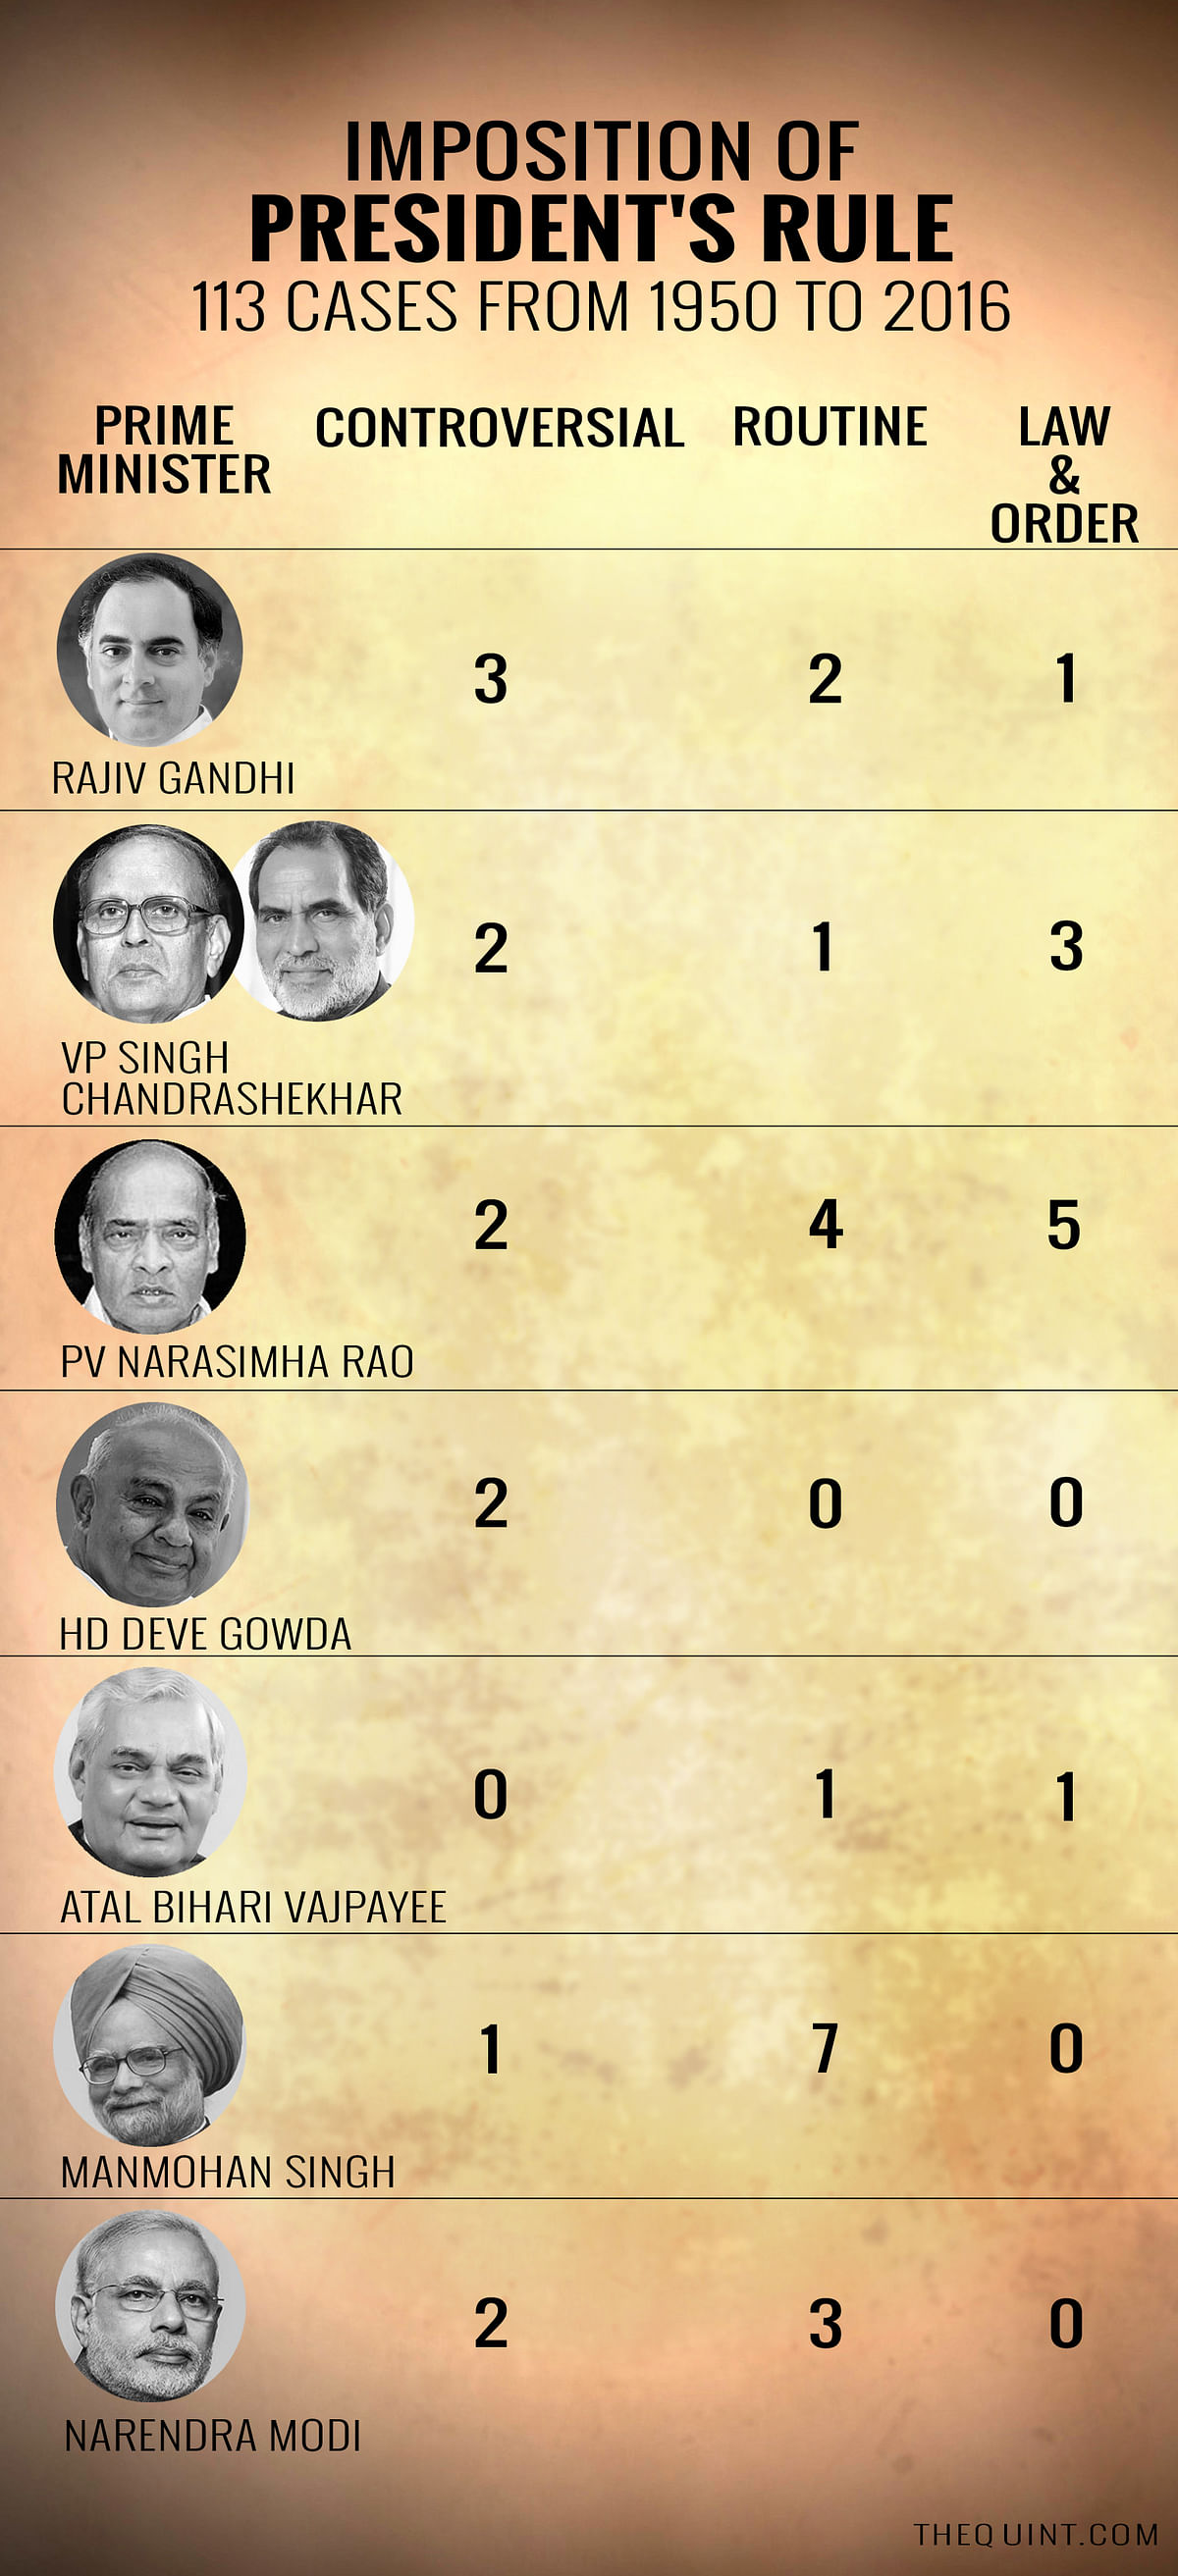 Amitabh Dubey traces the instances when  President’s rule was imposed by different prime ministers since 1950.